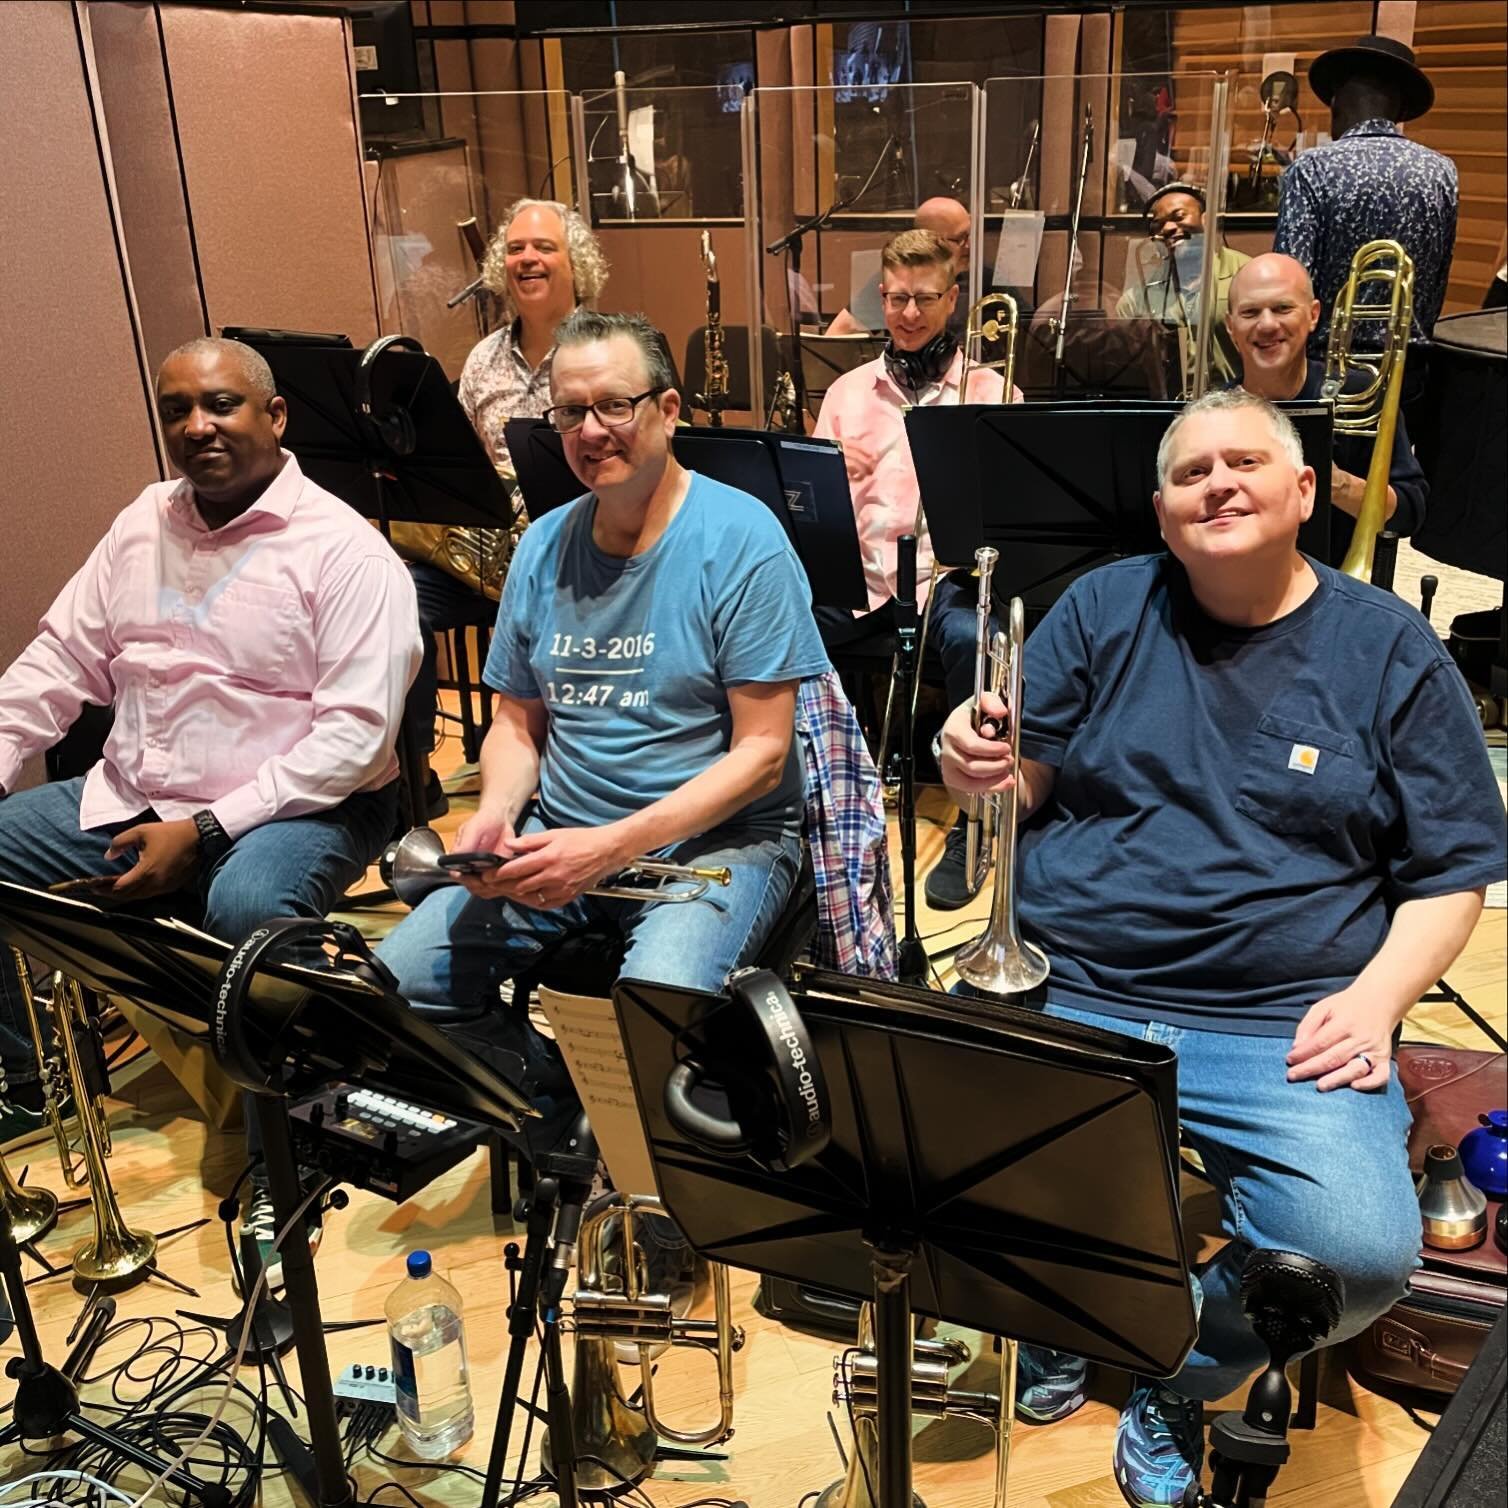 Brass section for the &ldquo;The Wiz&rdquo; cast album!! It&rsquo;s a privilege to play with these gentlemen every night!!
&bull;
&bull;
#thewizbroadway #broadwaymusical #broadwaycastalbum #easeondowntheroad #brasssection #whoneedstonynominations #je